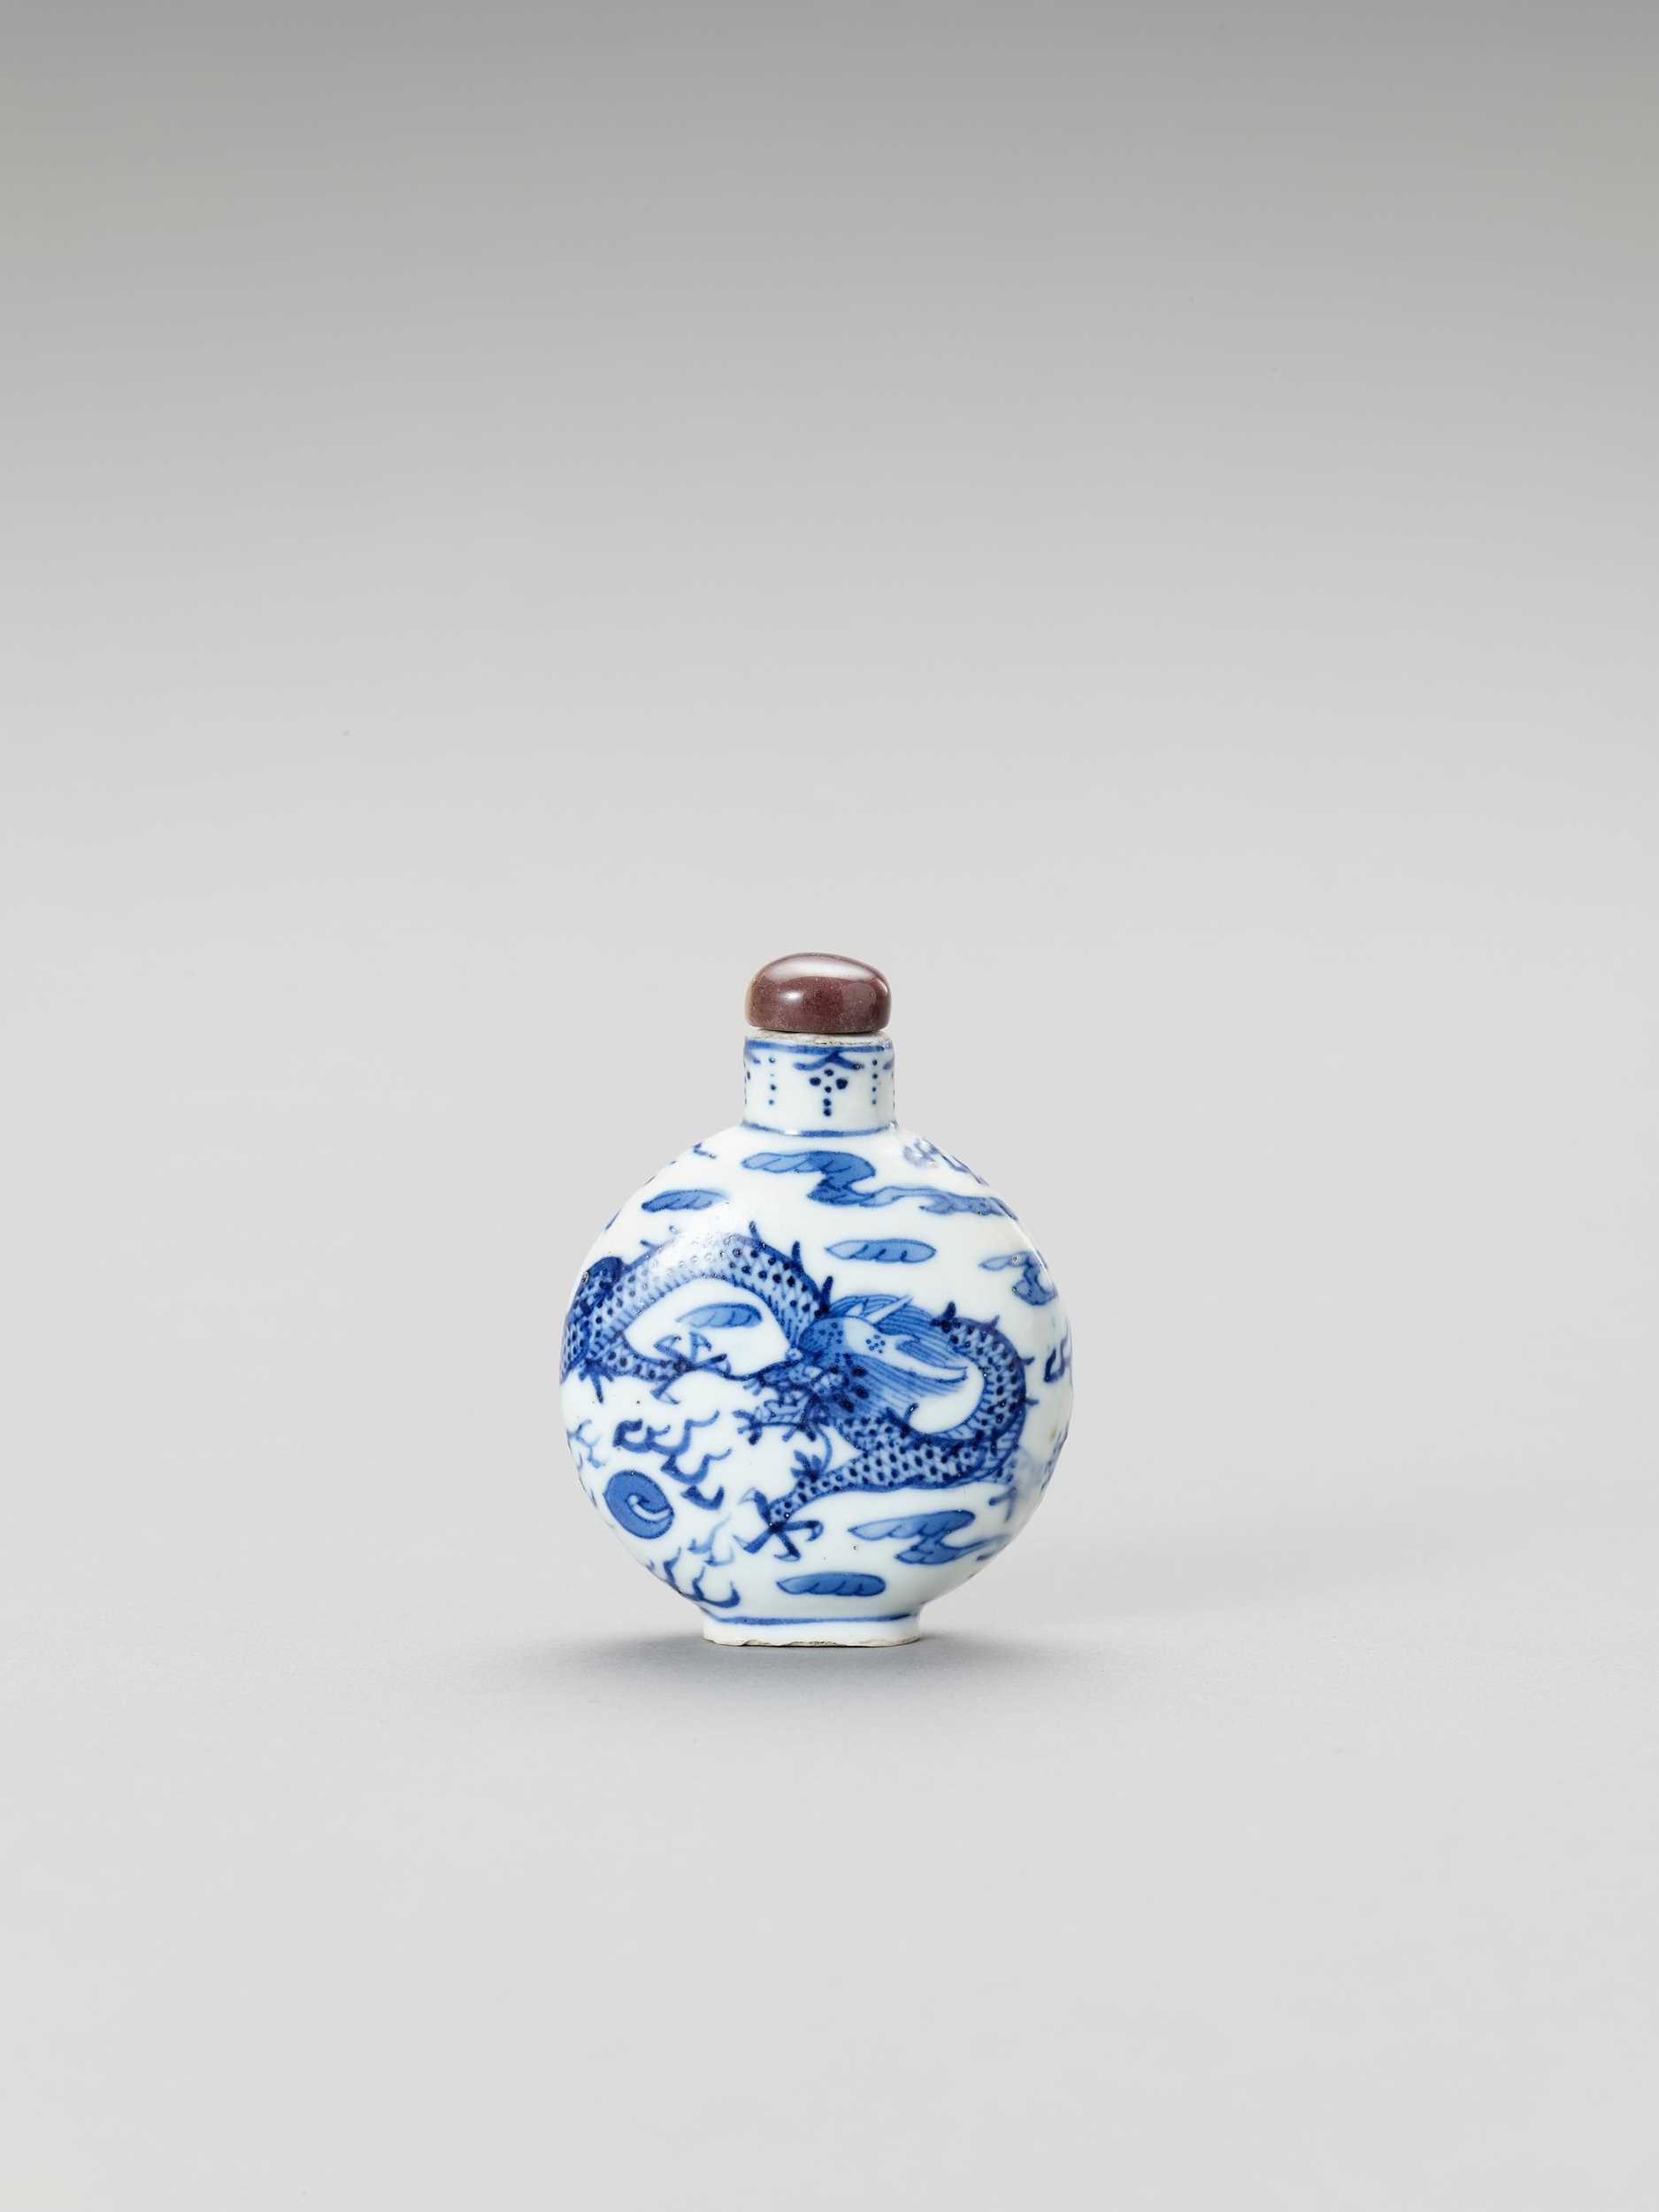 Lot 831 - A BLUE AND WHITE PORCELAIN 'DRAGON' SNUFF BOTTLE